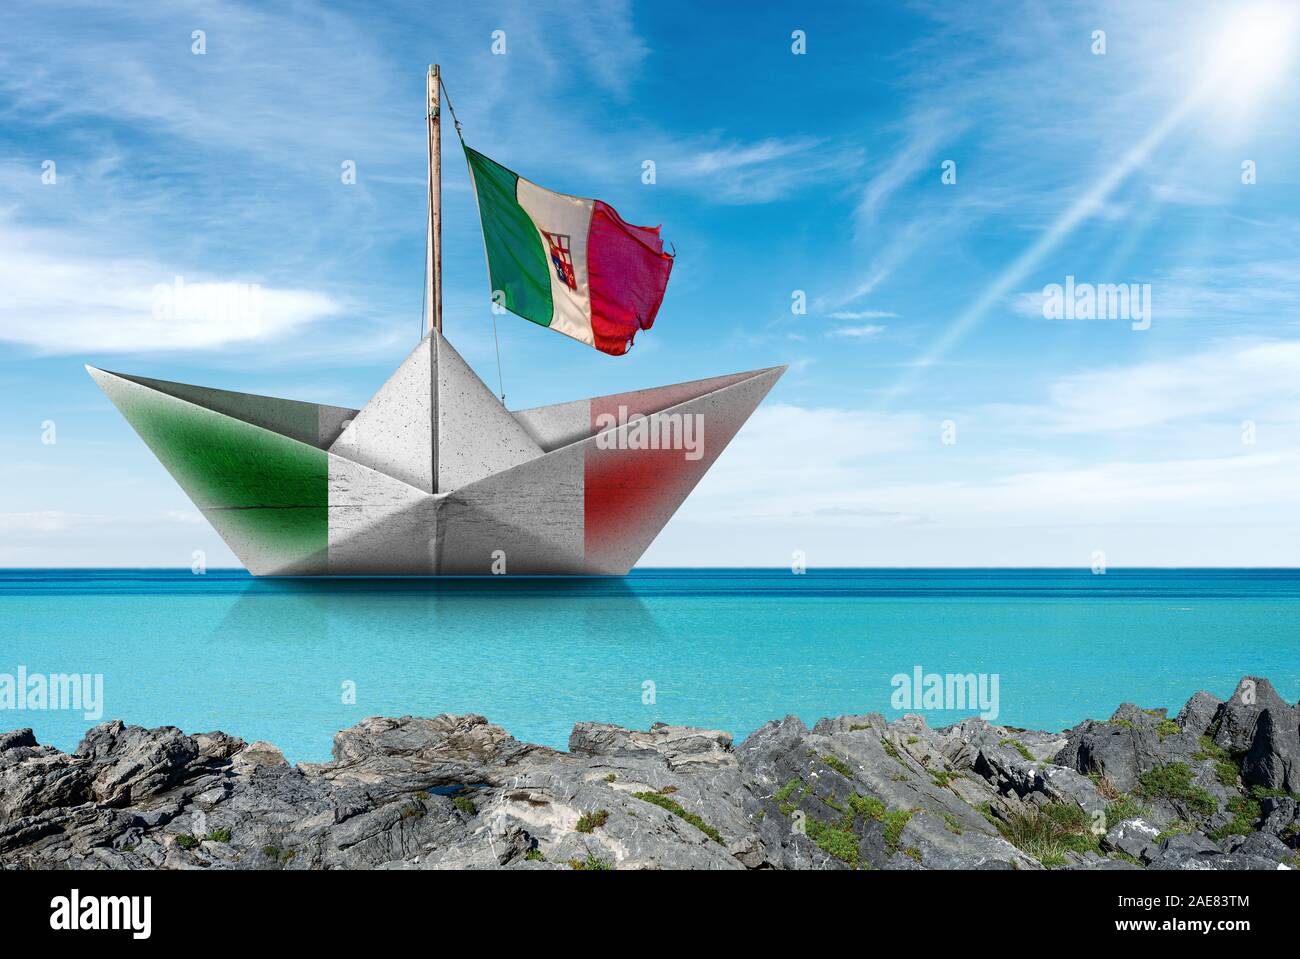 White paper boat with the Italian flag, in a turquoise sea with blue sky, clouds and sun rays, photography Stock Photo